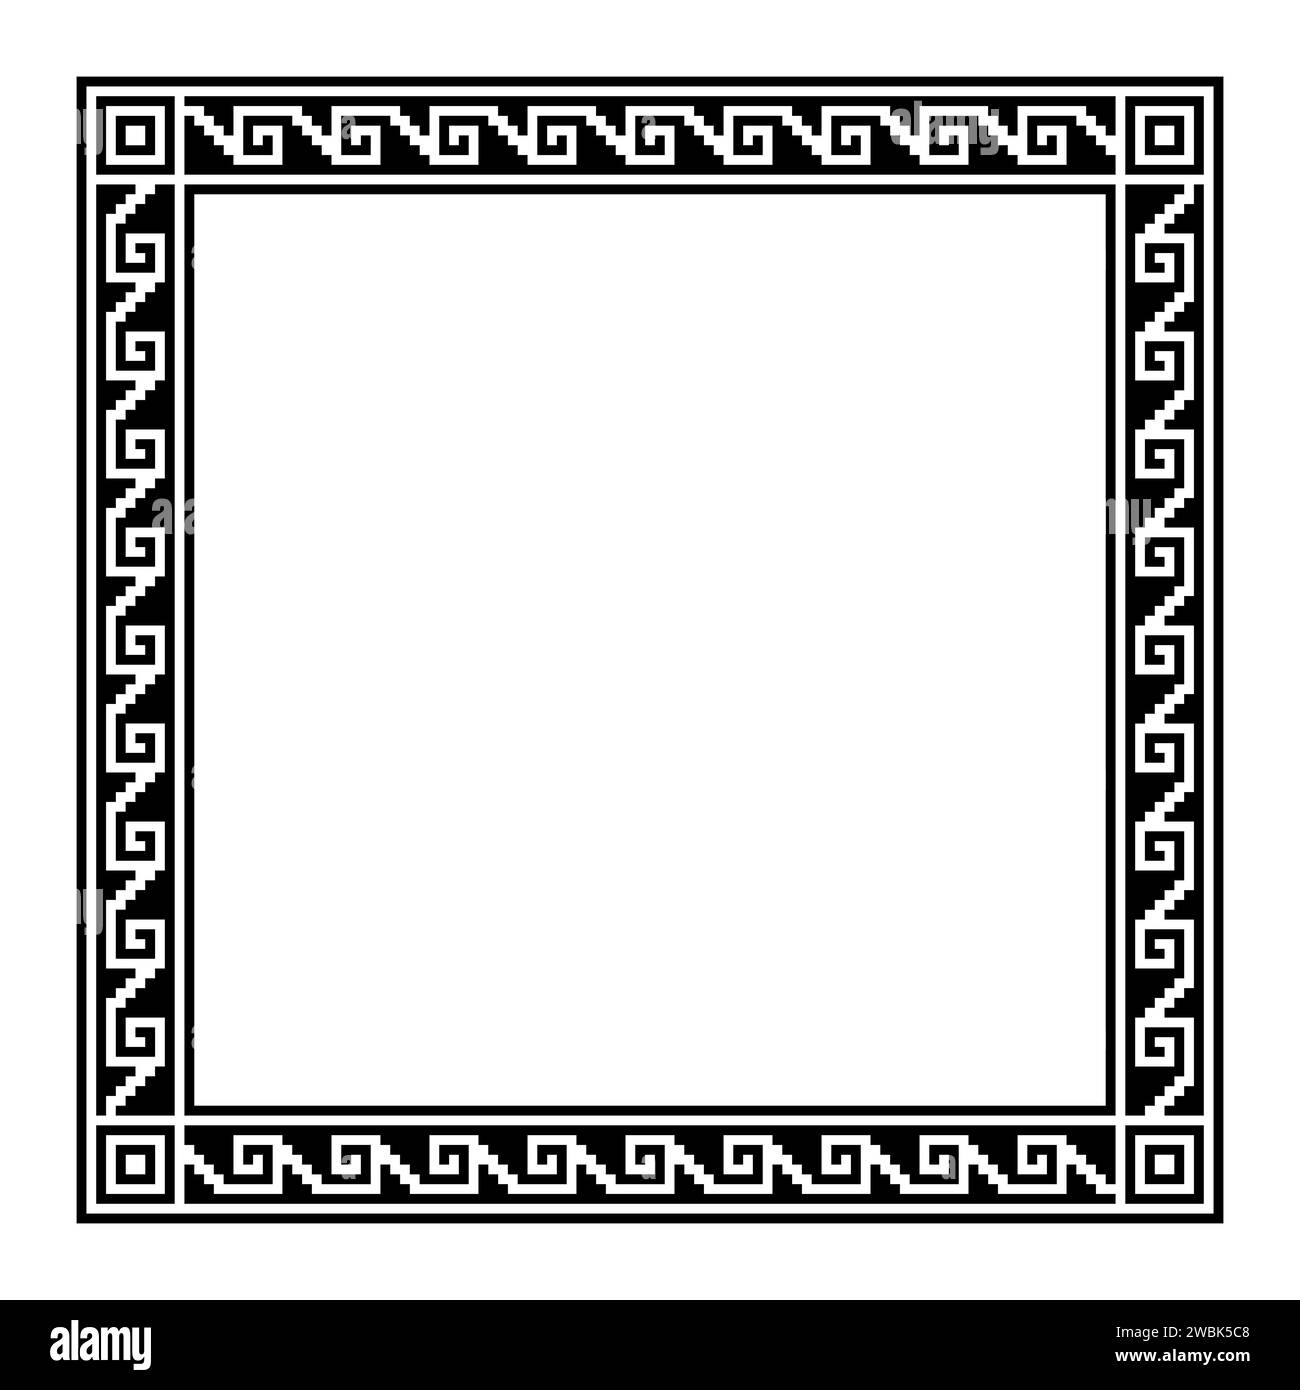 Stepped fret motif, Aztec style square frame with meander pattern. Border made of steps, seamlessly connected to a spiral, similar to Greek key. Stock Photo